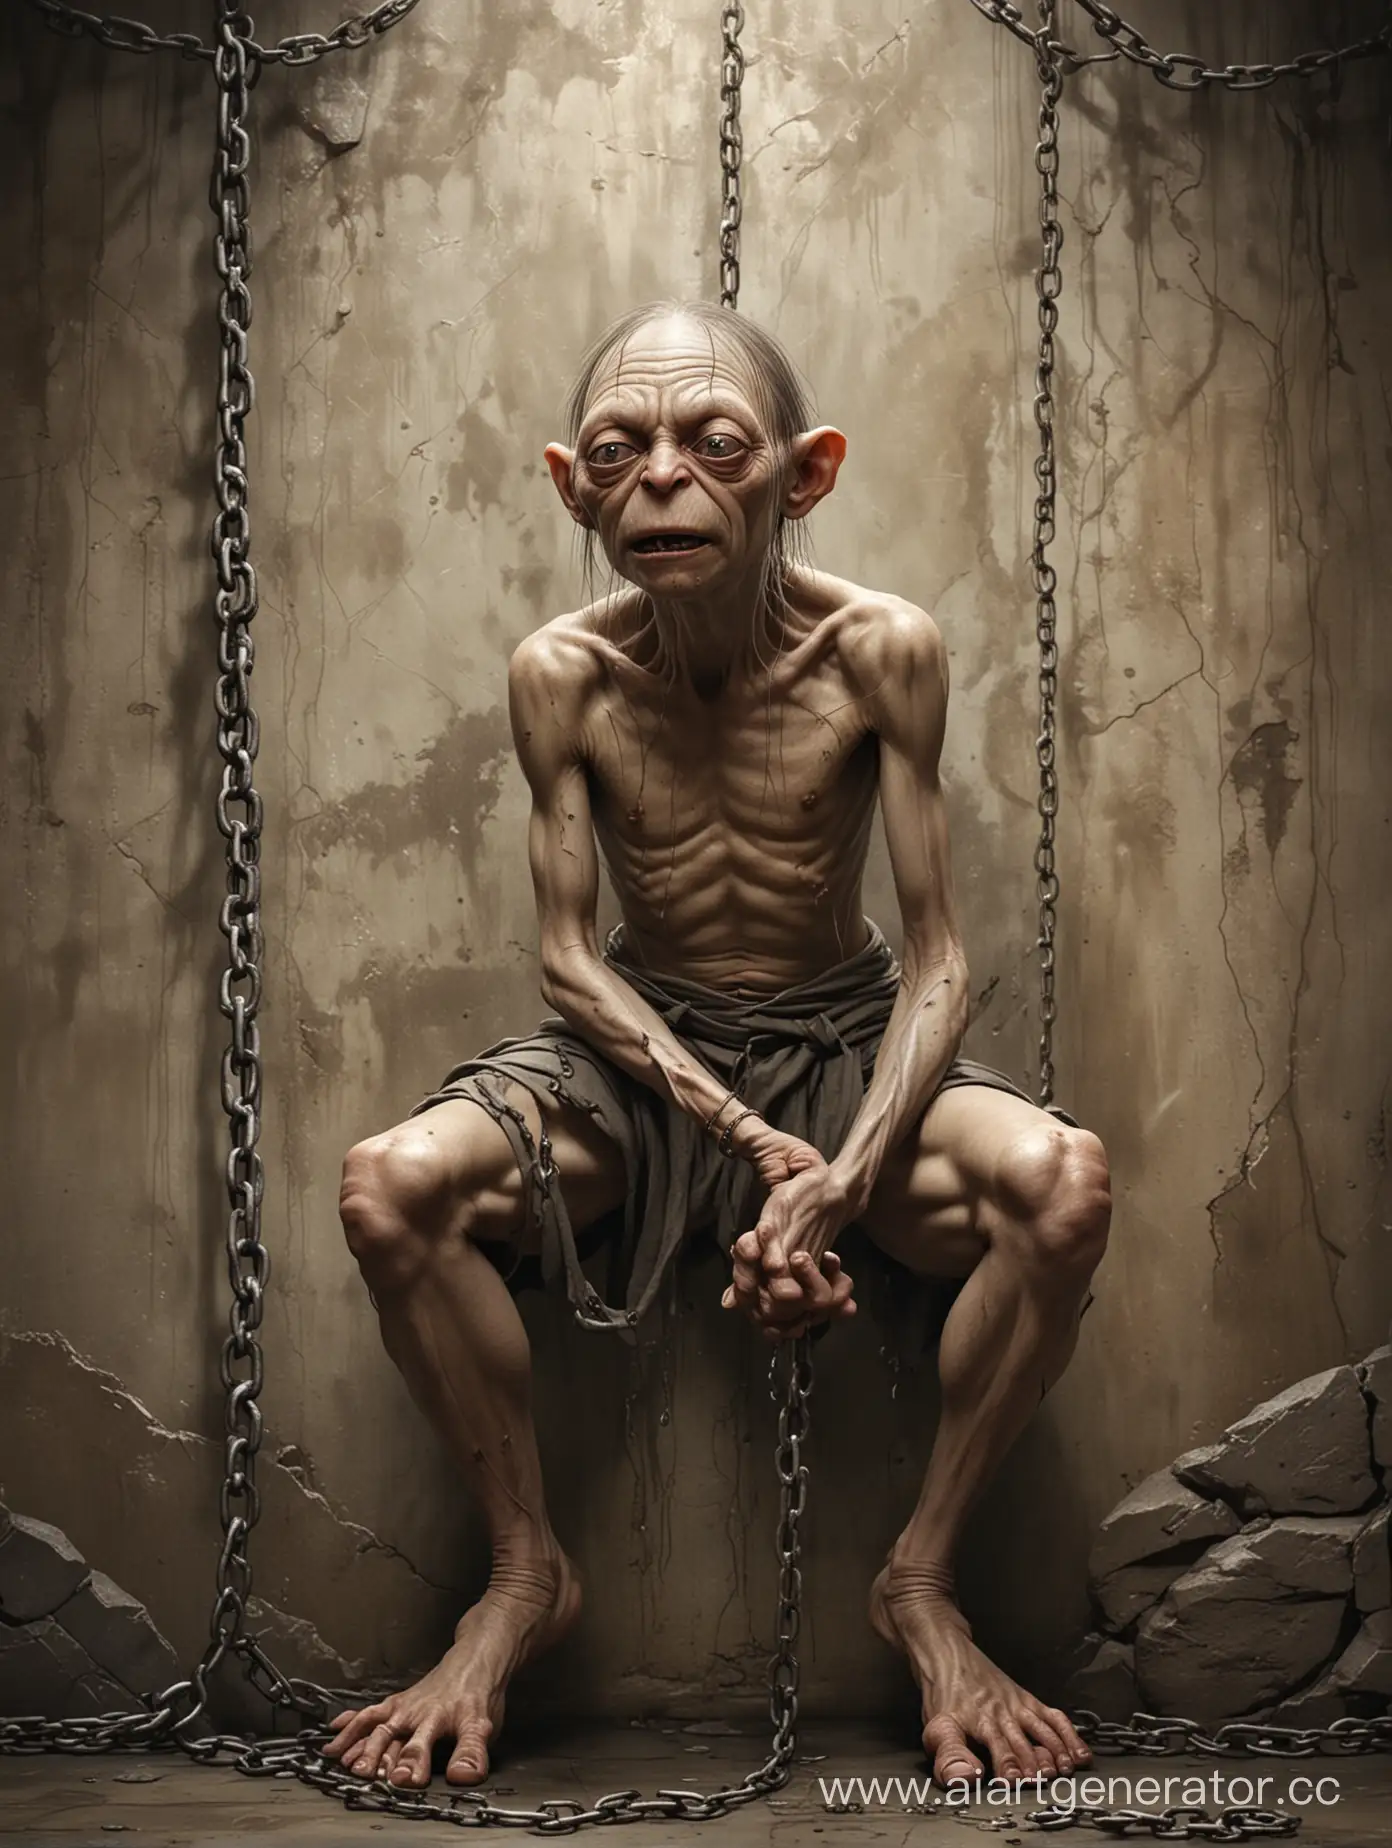 Fantasy-Mythology-Illustration-Chained-Prisoner-Resembling-Gollum-in-Dungeons-and-Dragons-Art